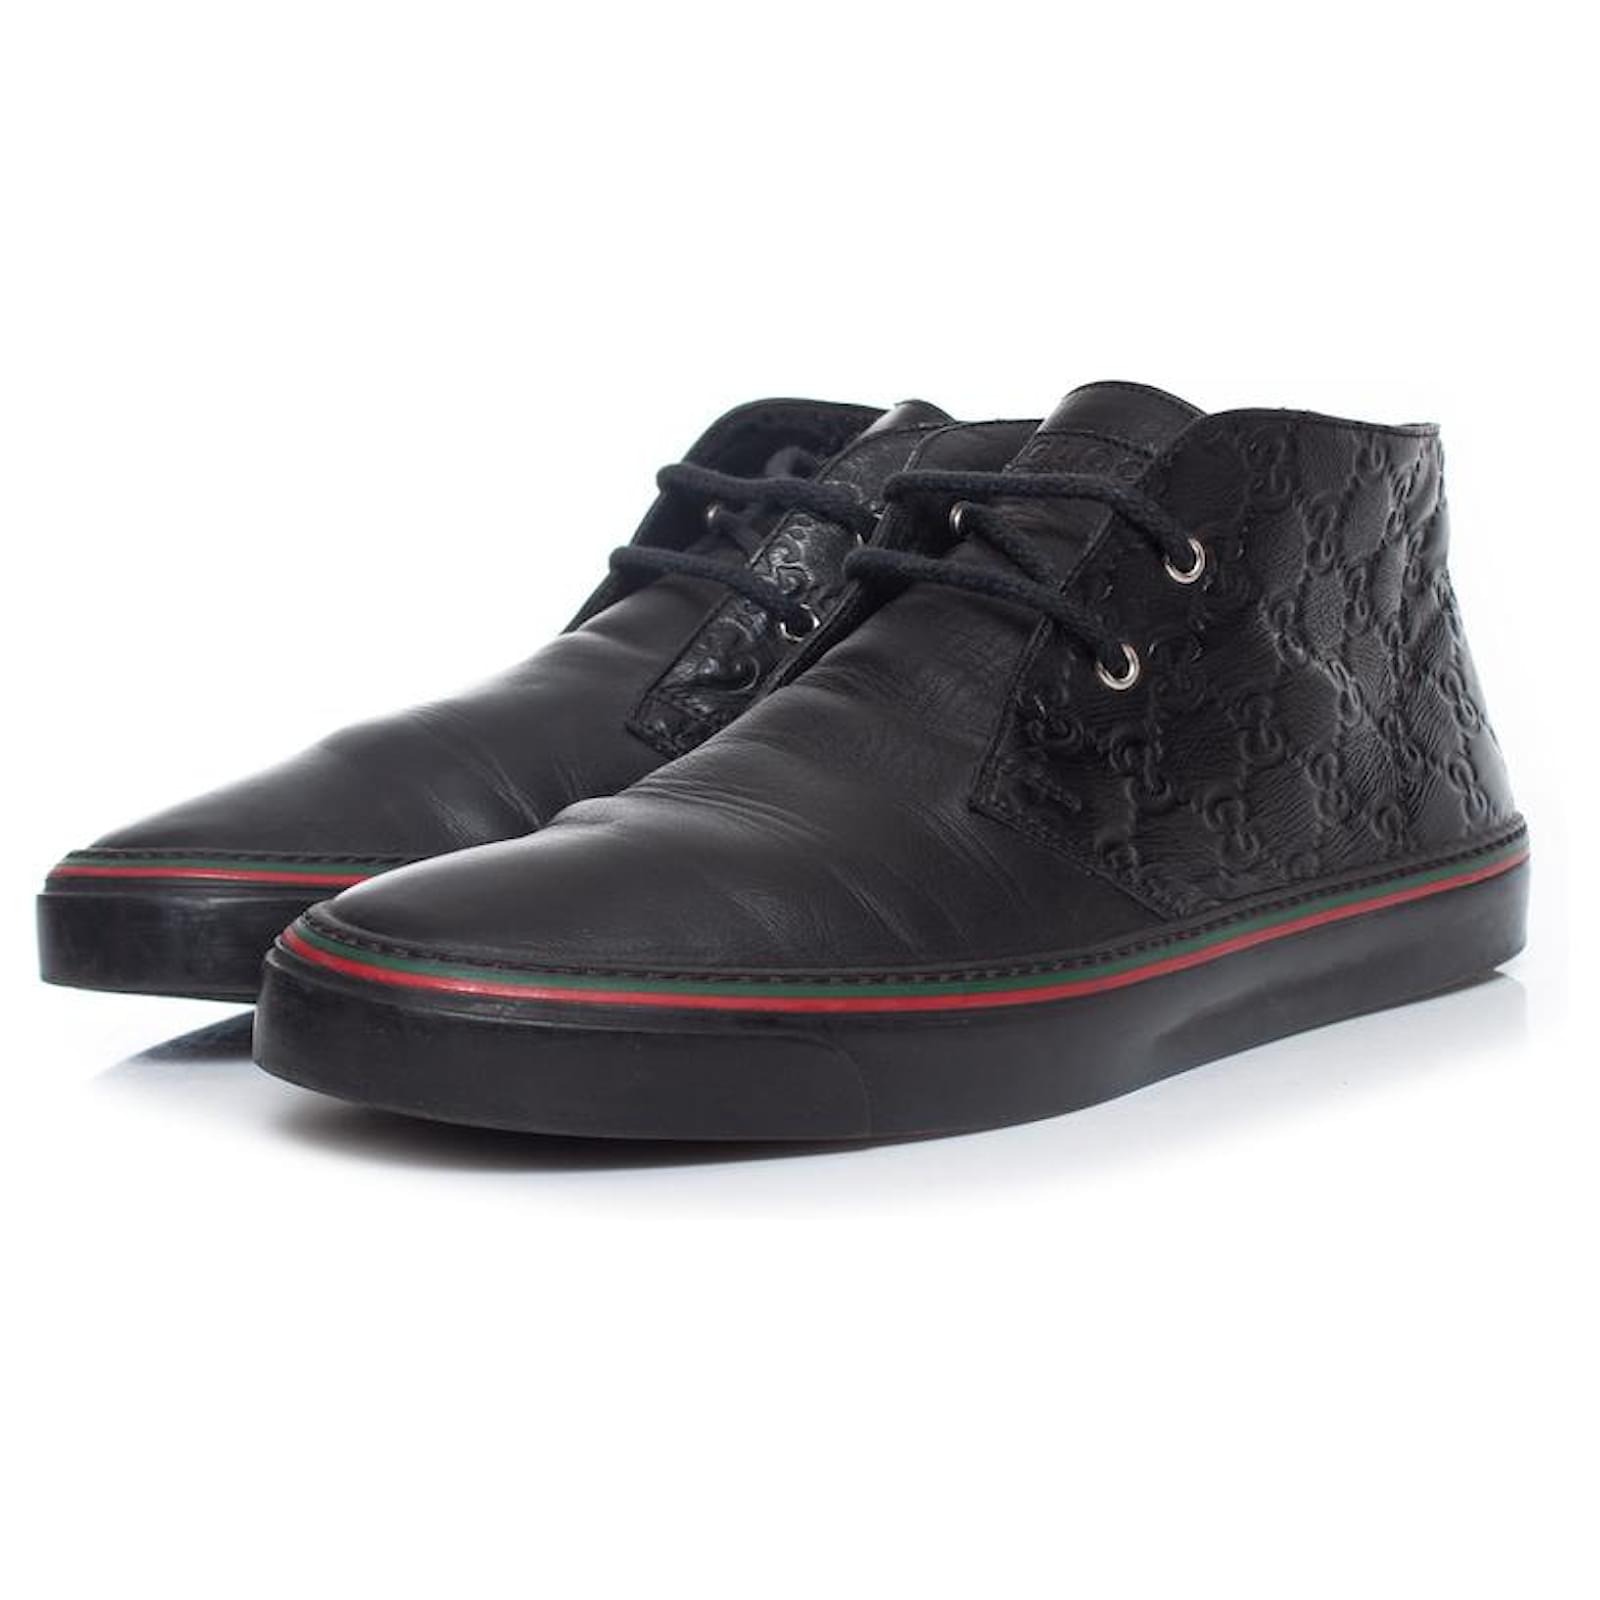 Men's GG lace-up shoe in black leather